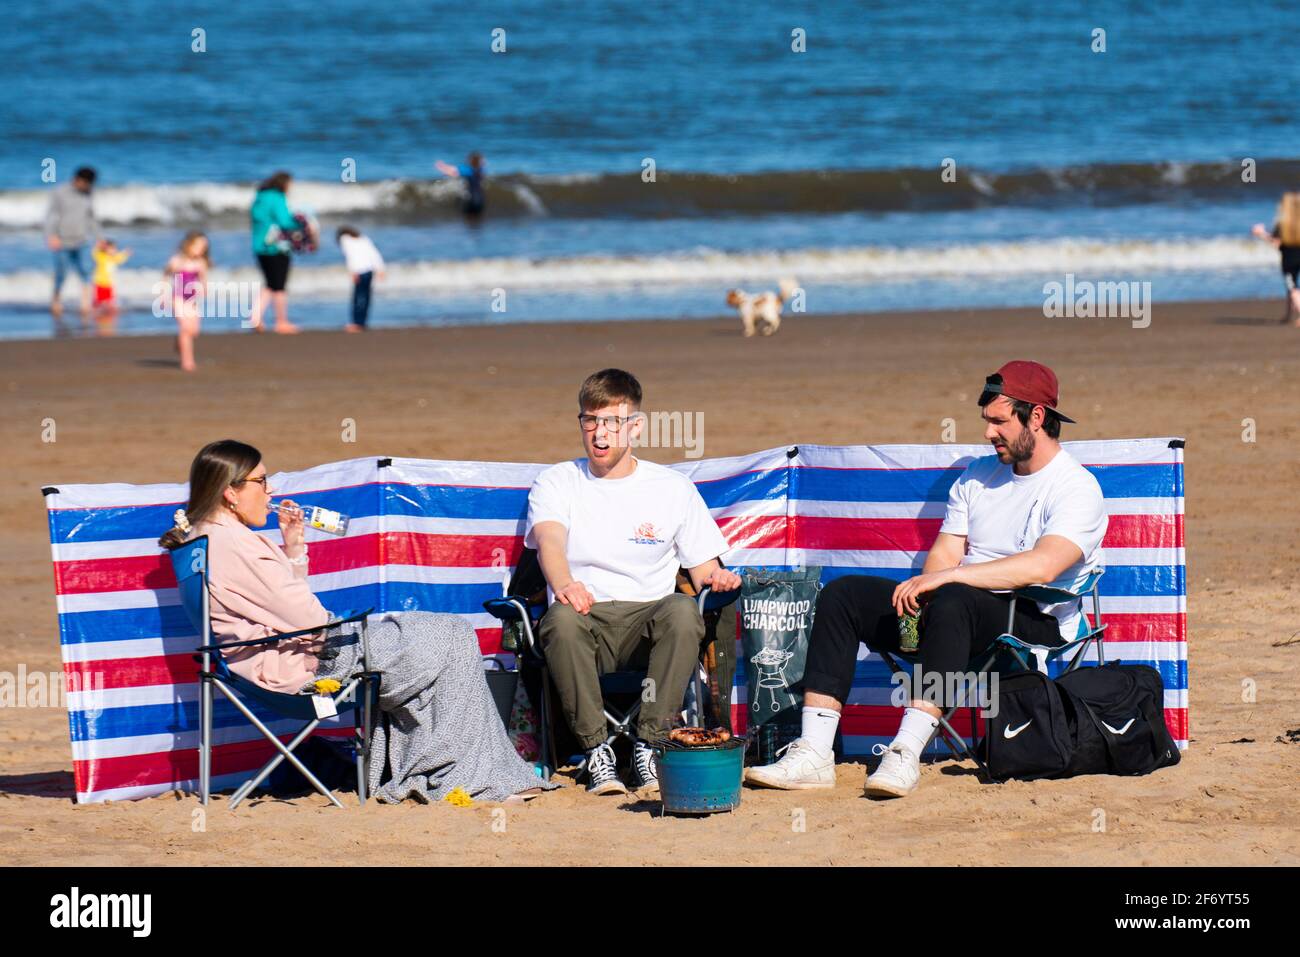 Portobello, Scotland, UK. 3 April 2021. Easter weekend crowds descend on Portobello beach and promenade to make the most of newly relaxed  Covid-19 lockdown travel restrictions and warm sunshine with uninterrupted blue skies. Pic; Picnics were popular on the beach.  Iain Masterton/Alamy Live News Stock Photo